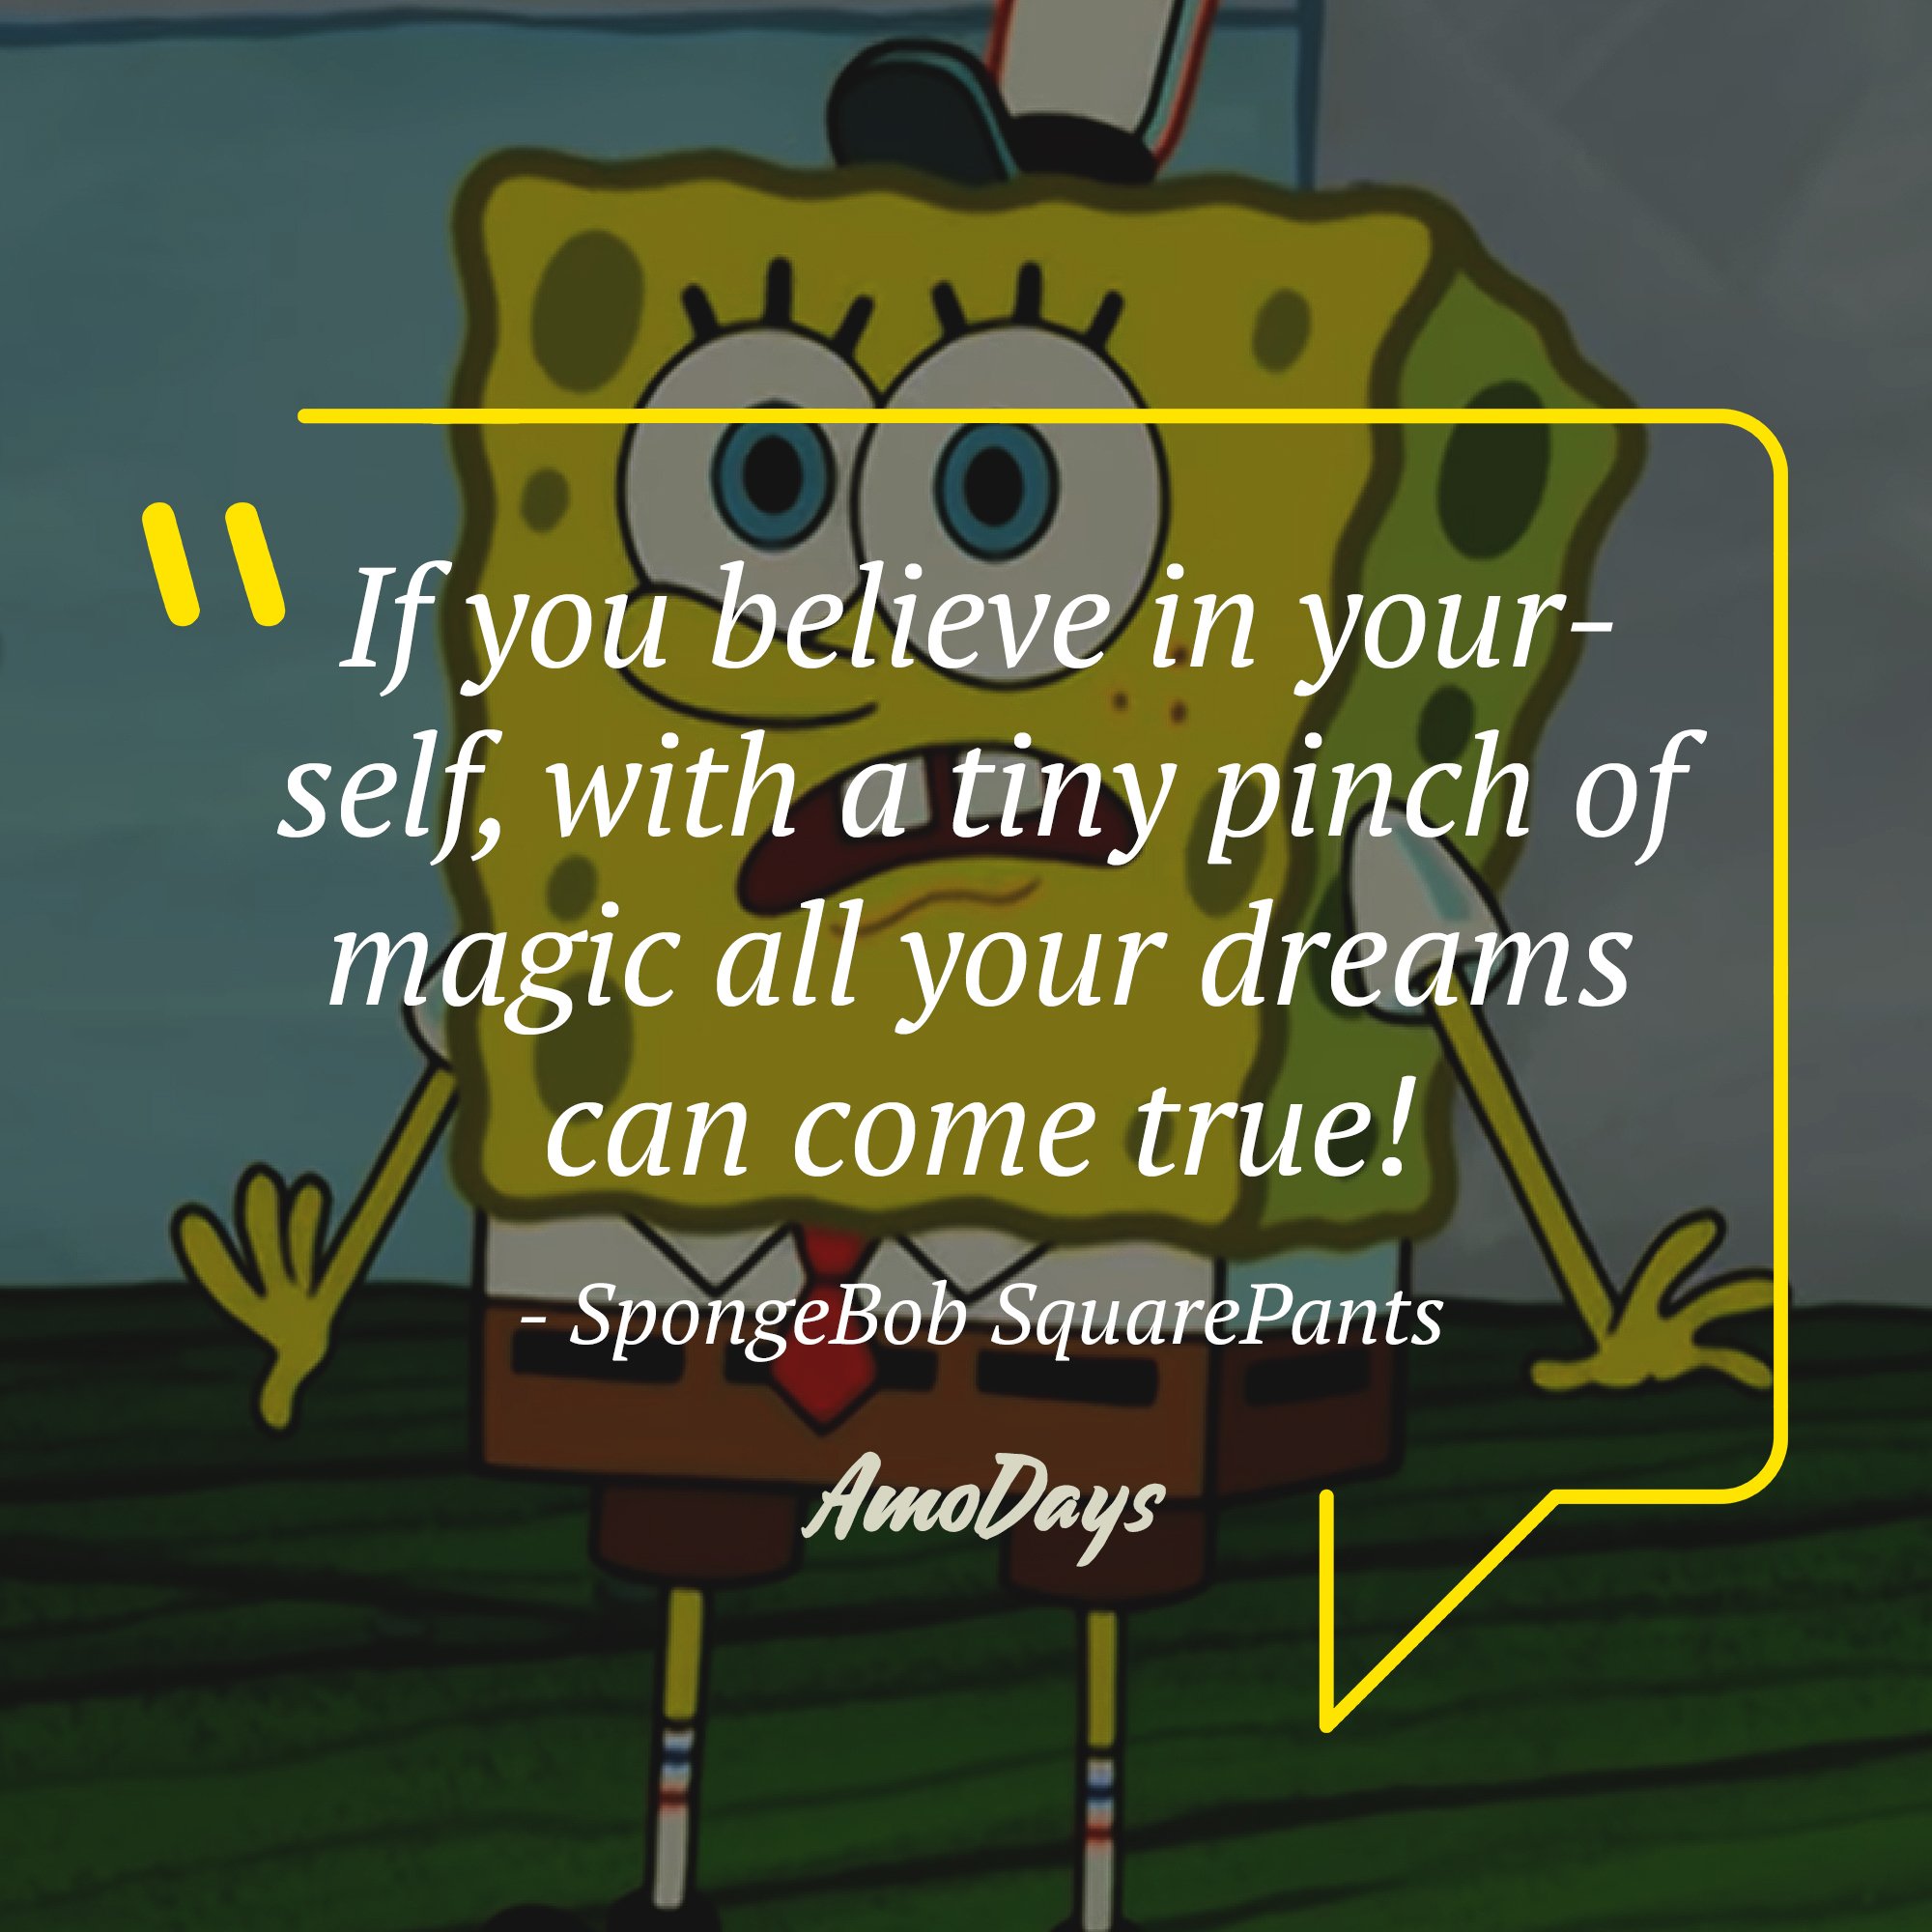 SpongeBob SquarePants's quote: "If you believe in yourself, with a tiny pinch of magic, all your dreams can come true!" | Image: AmoDays 